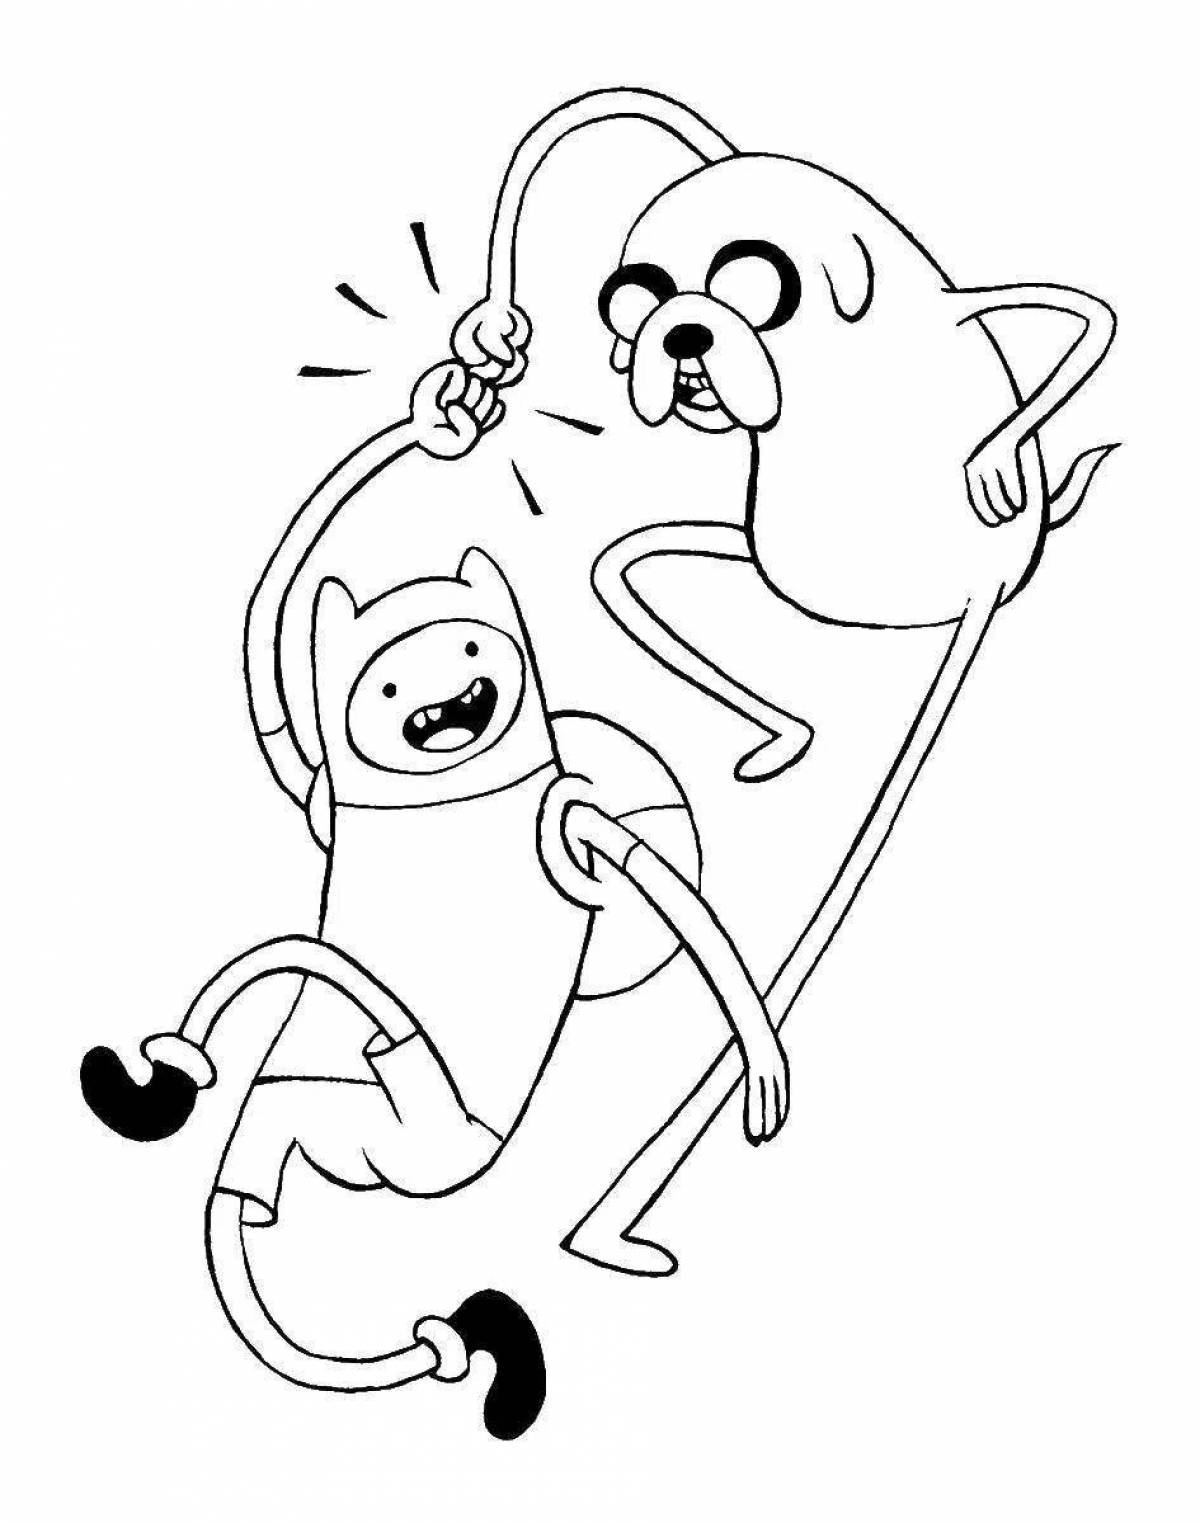 Adventure time fin and jake #3